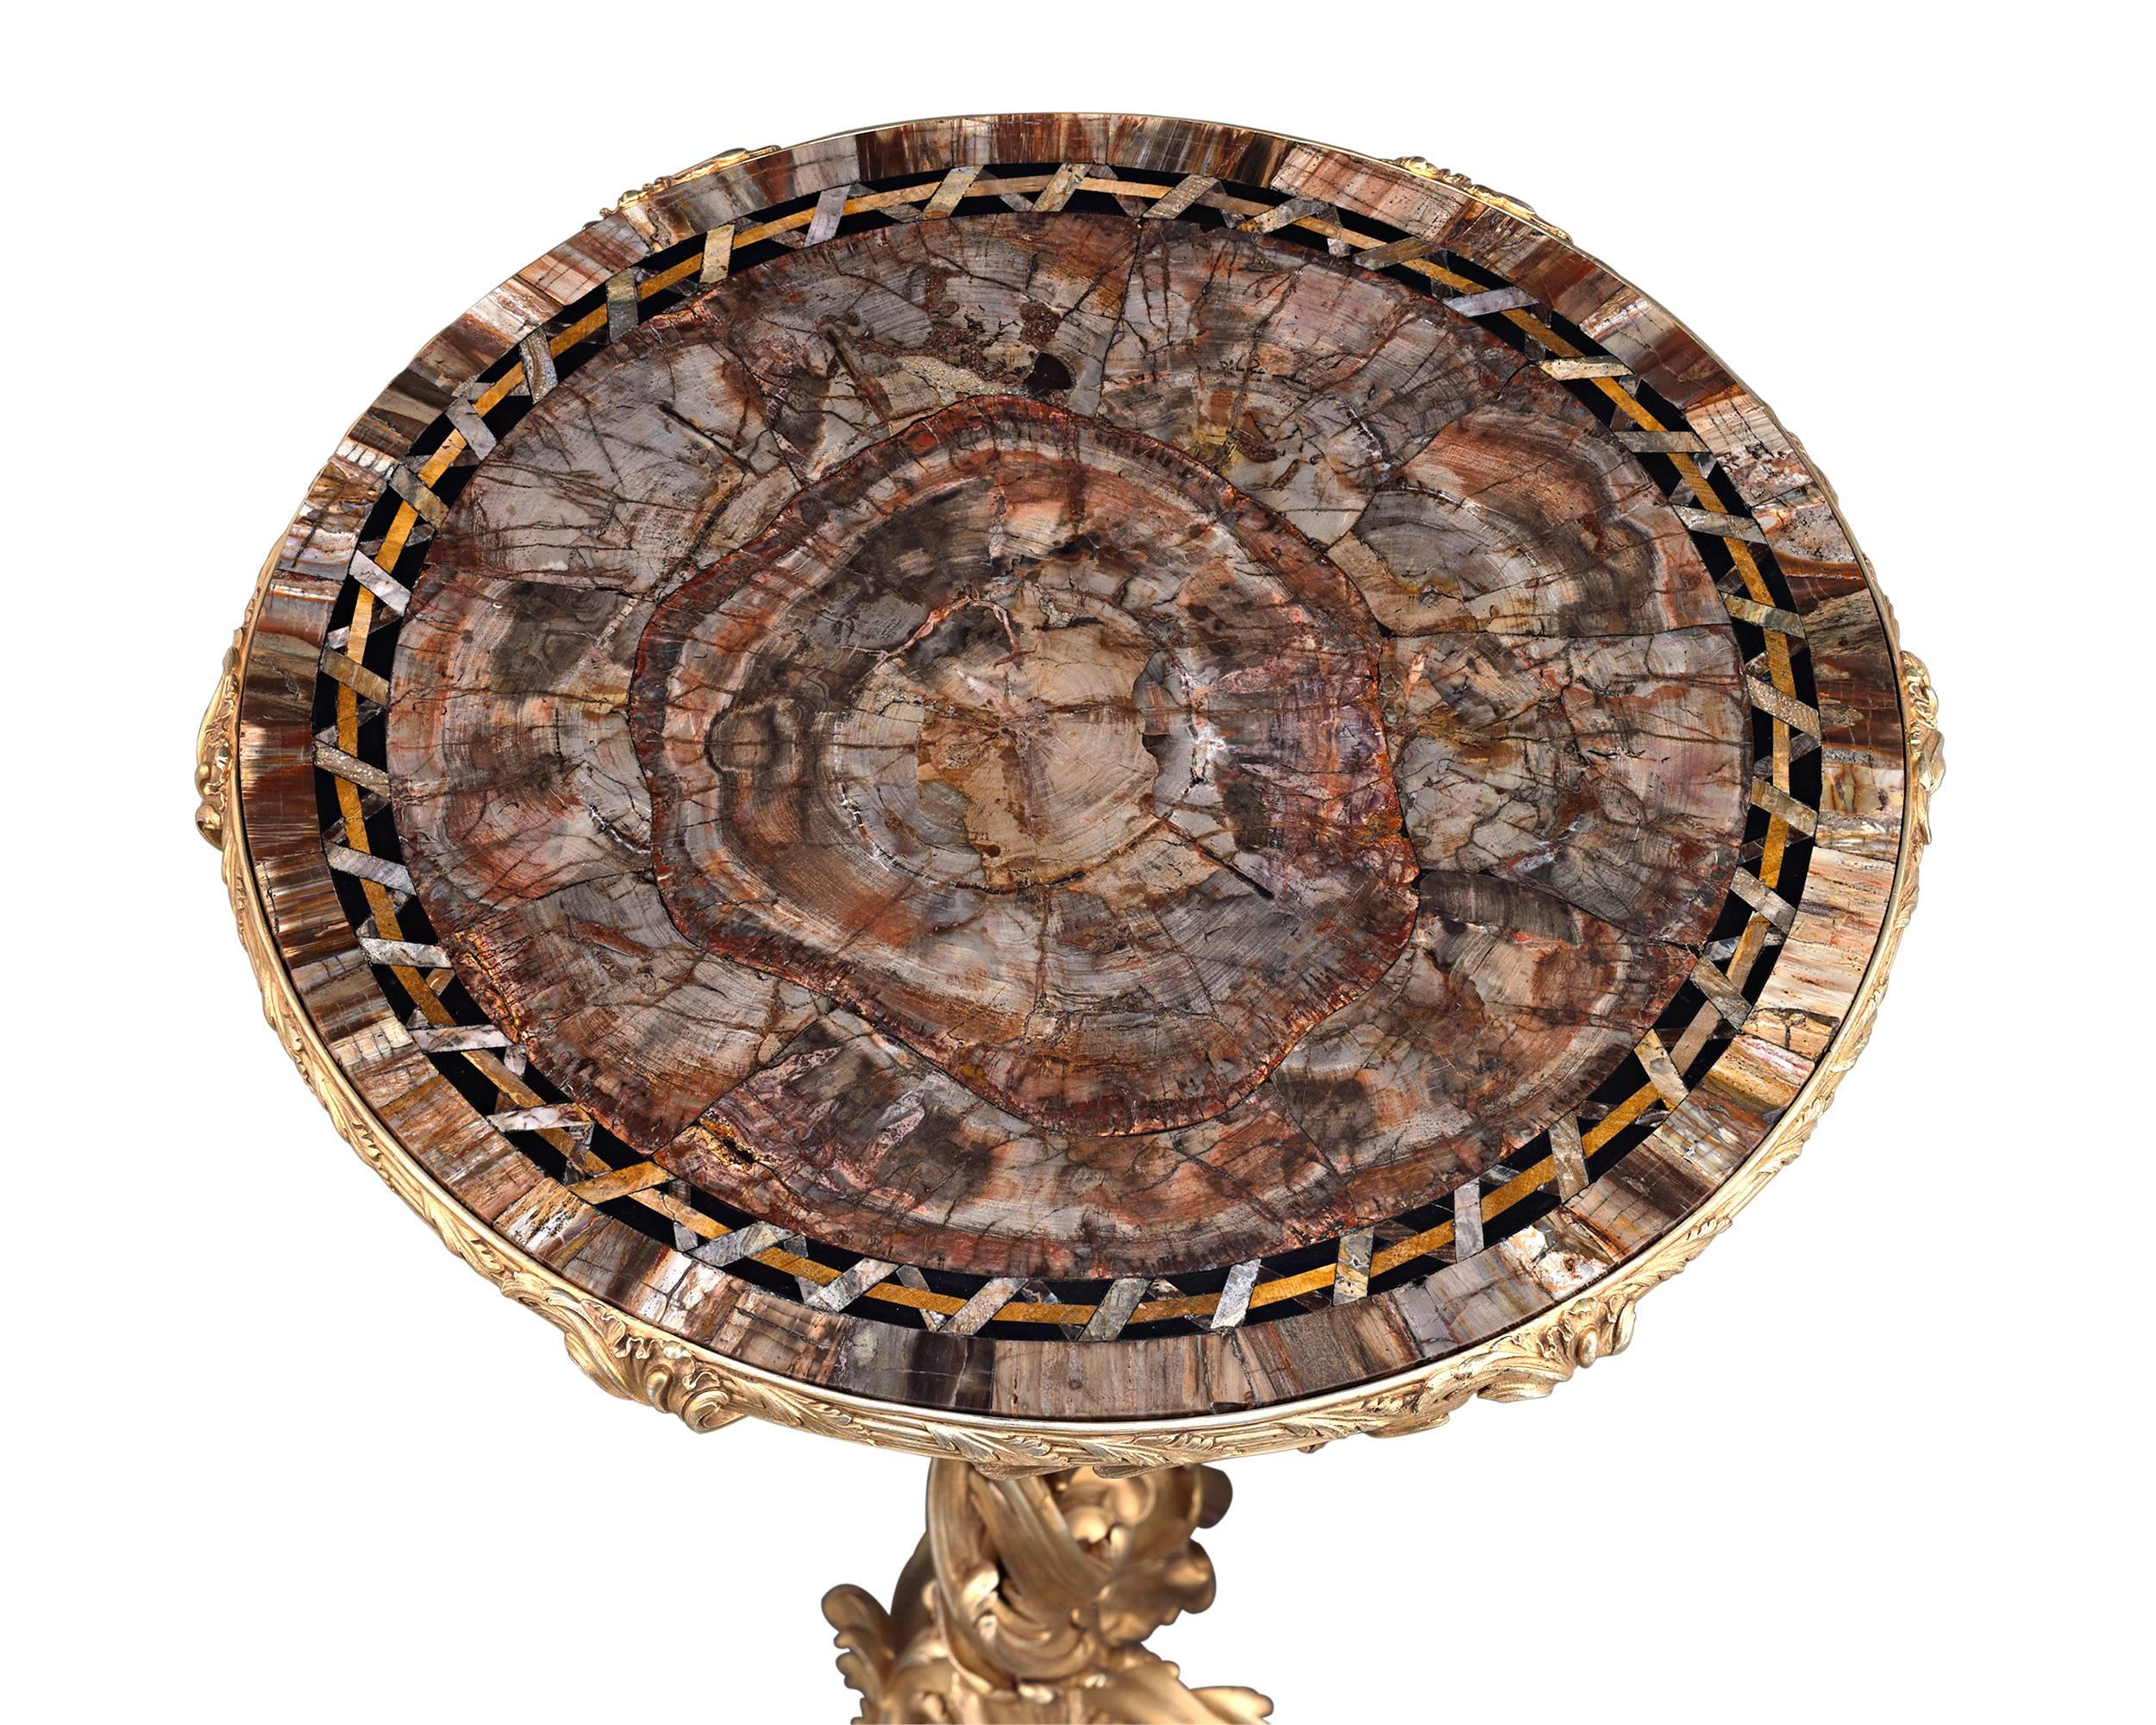 A phenomenal museum-quality masterwork gifted by France’s King Louis XV to a titled European family, this guéridon table features an immensely rare petrified wood surface set into a resplendent Rococo gilt bronze base.

The guéridon’s creation is